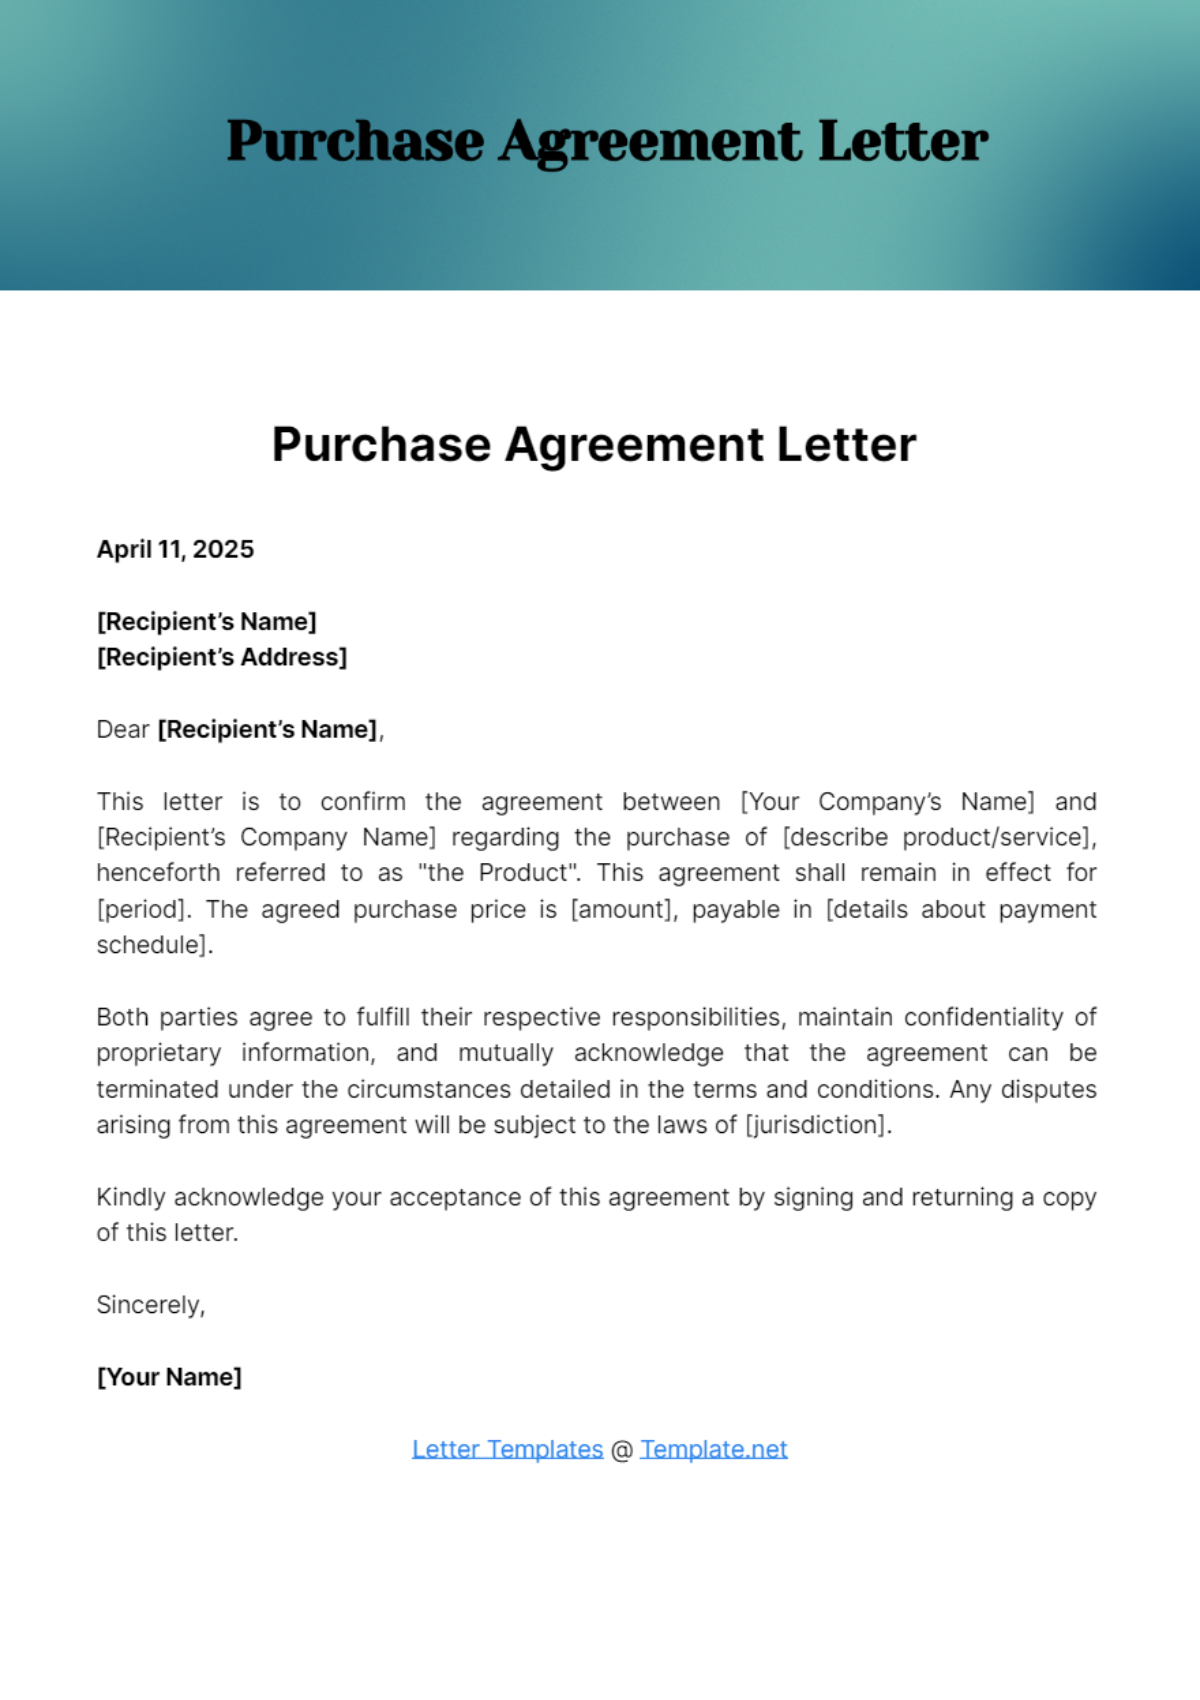 Free Purchase Agreement Letter Template